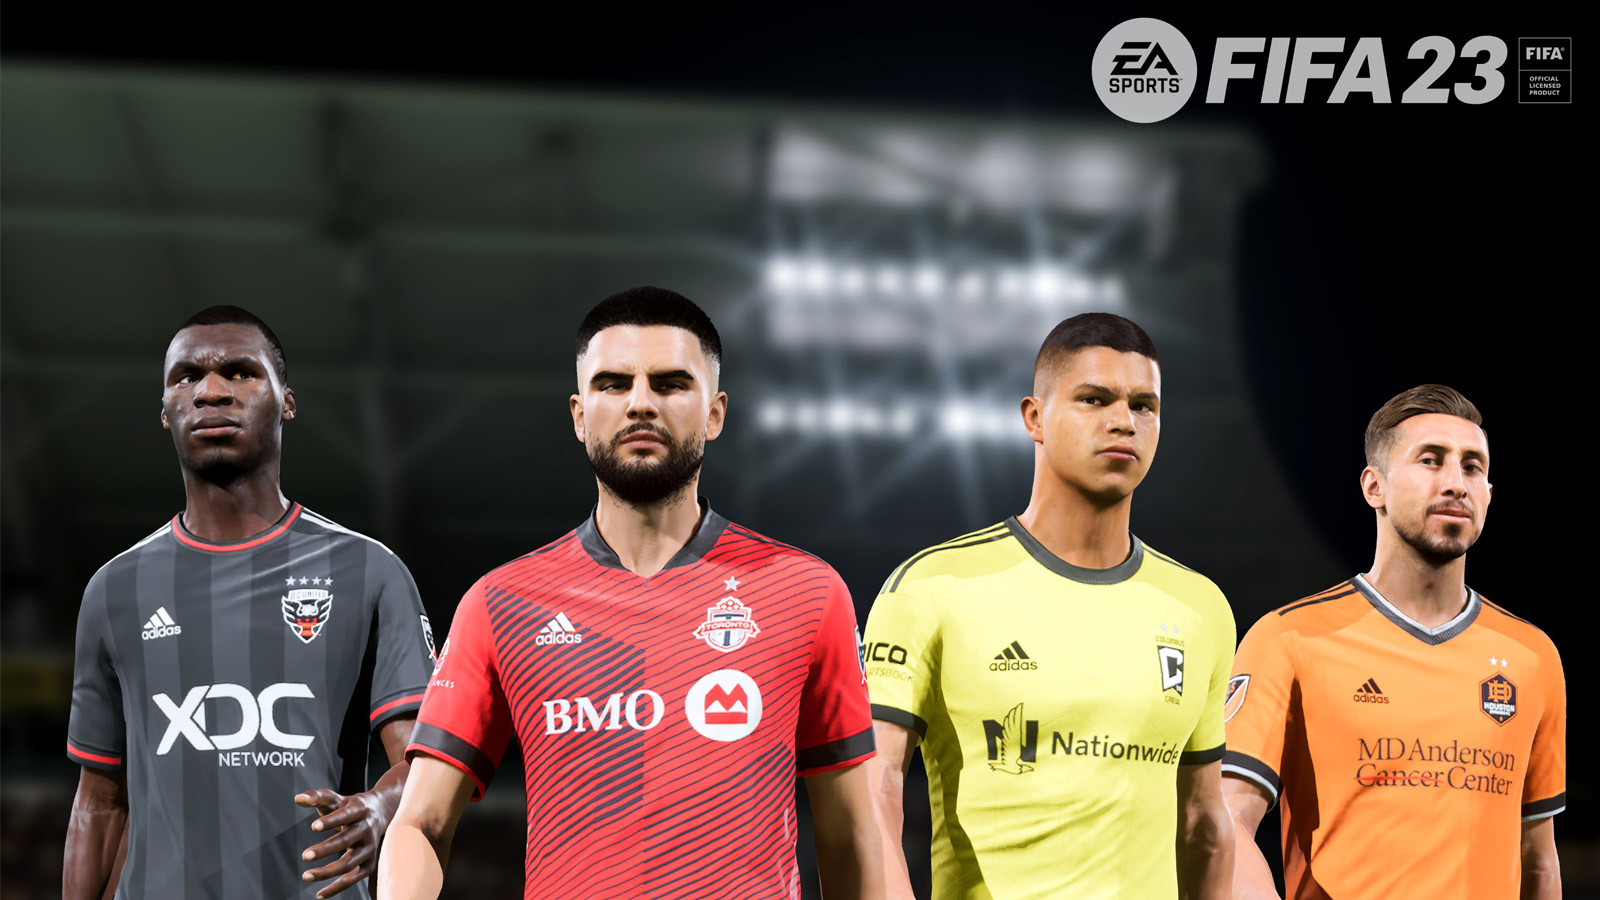 THE BEST PLAYERS UNDER £1 MILLION IN FIFA 23 CAREER MODE